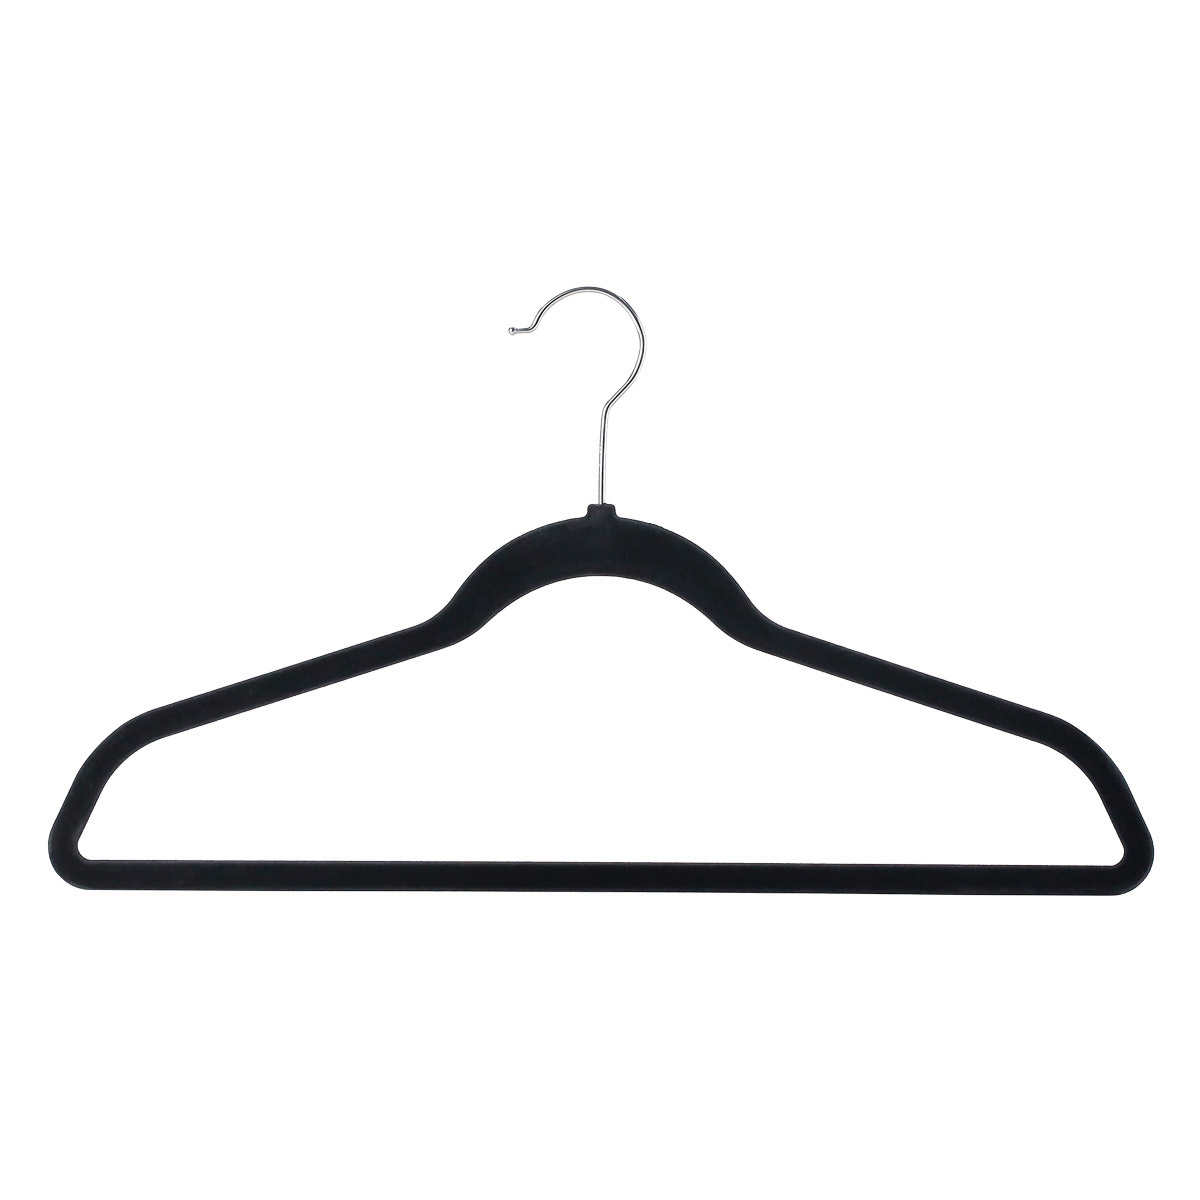 Premium Photo  Clothes on hangers in a men's clothing store shirts jackets  and jackets large selection of new collection